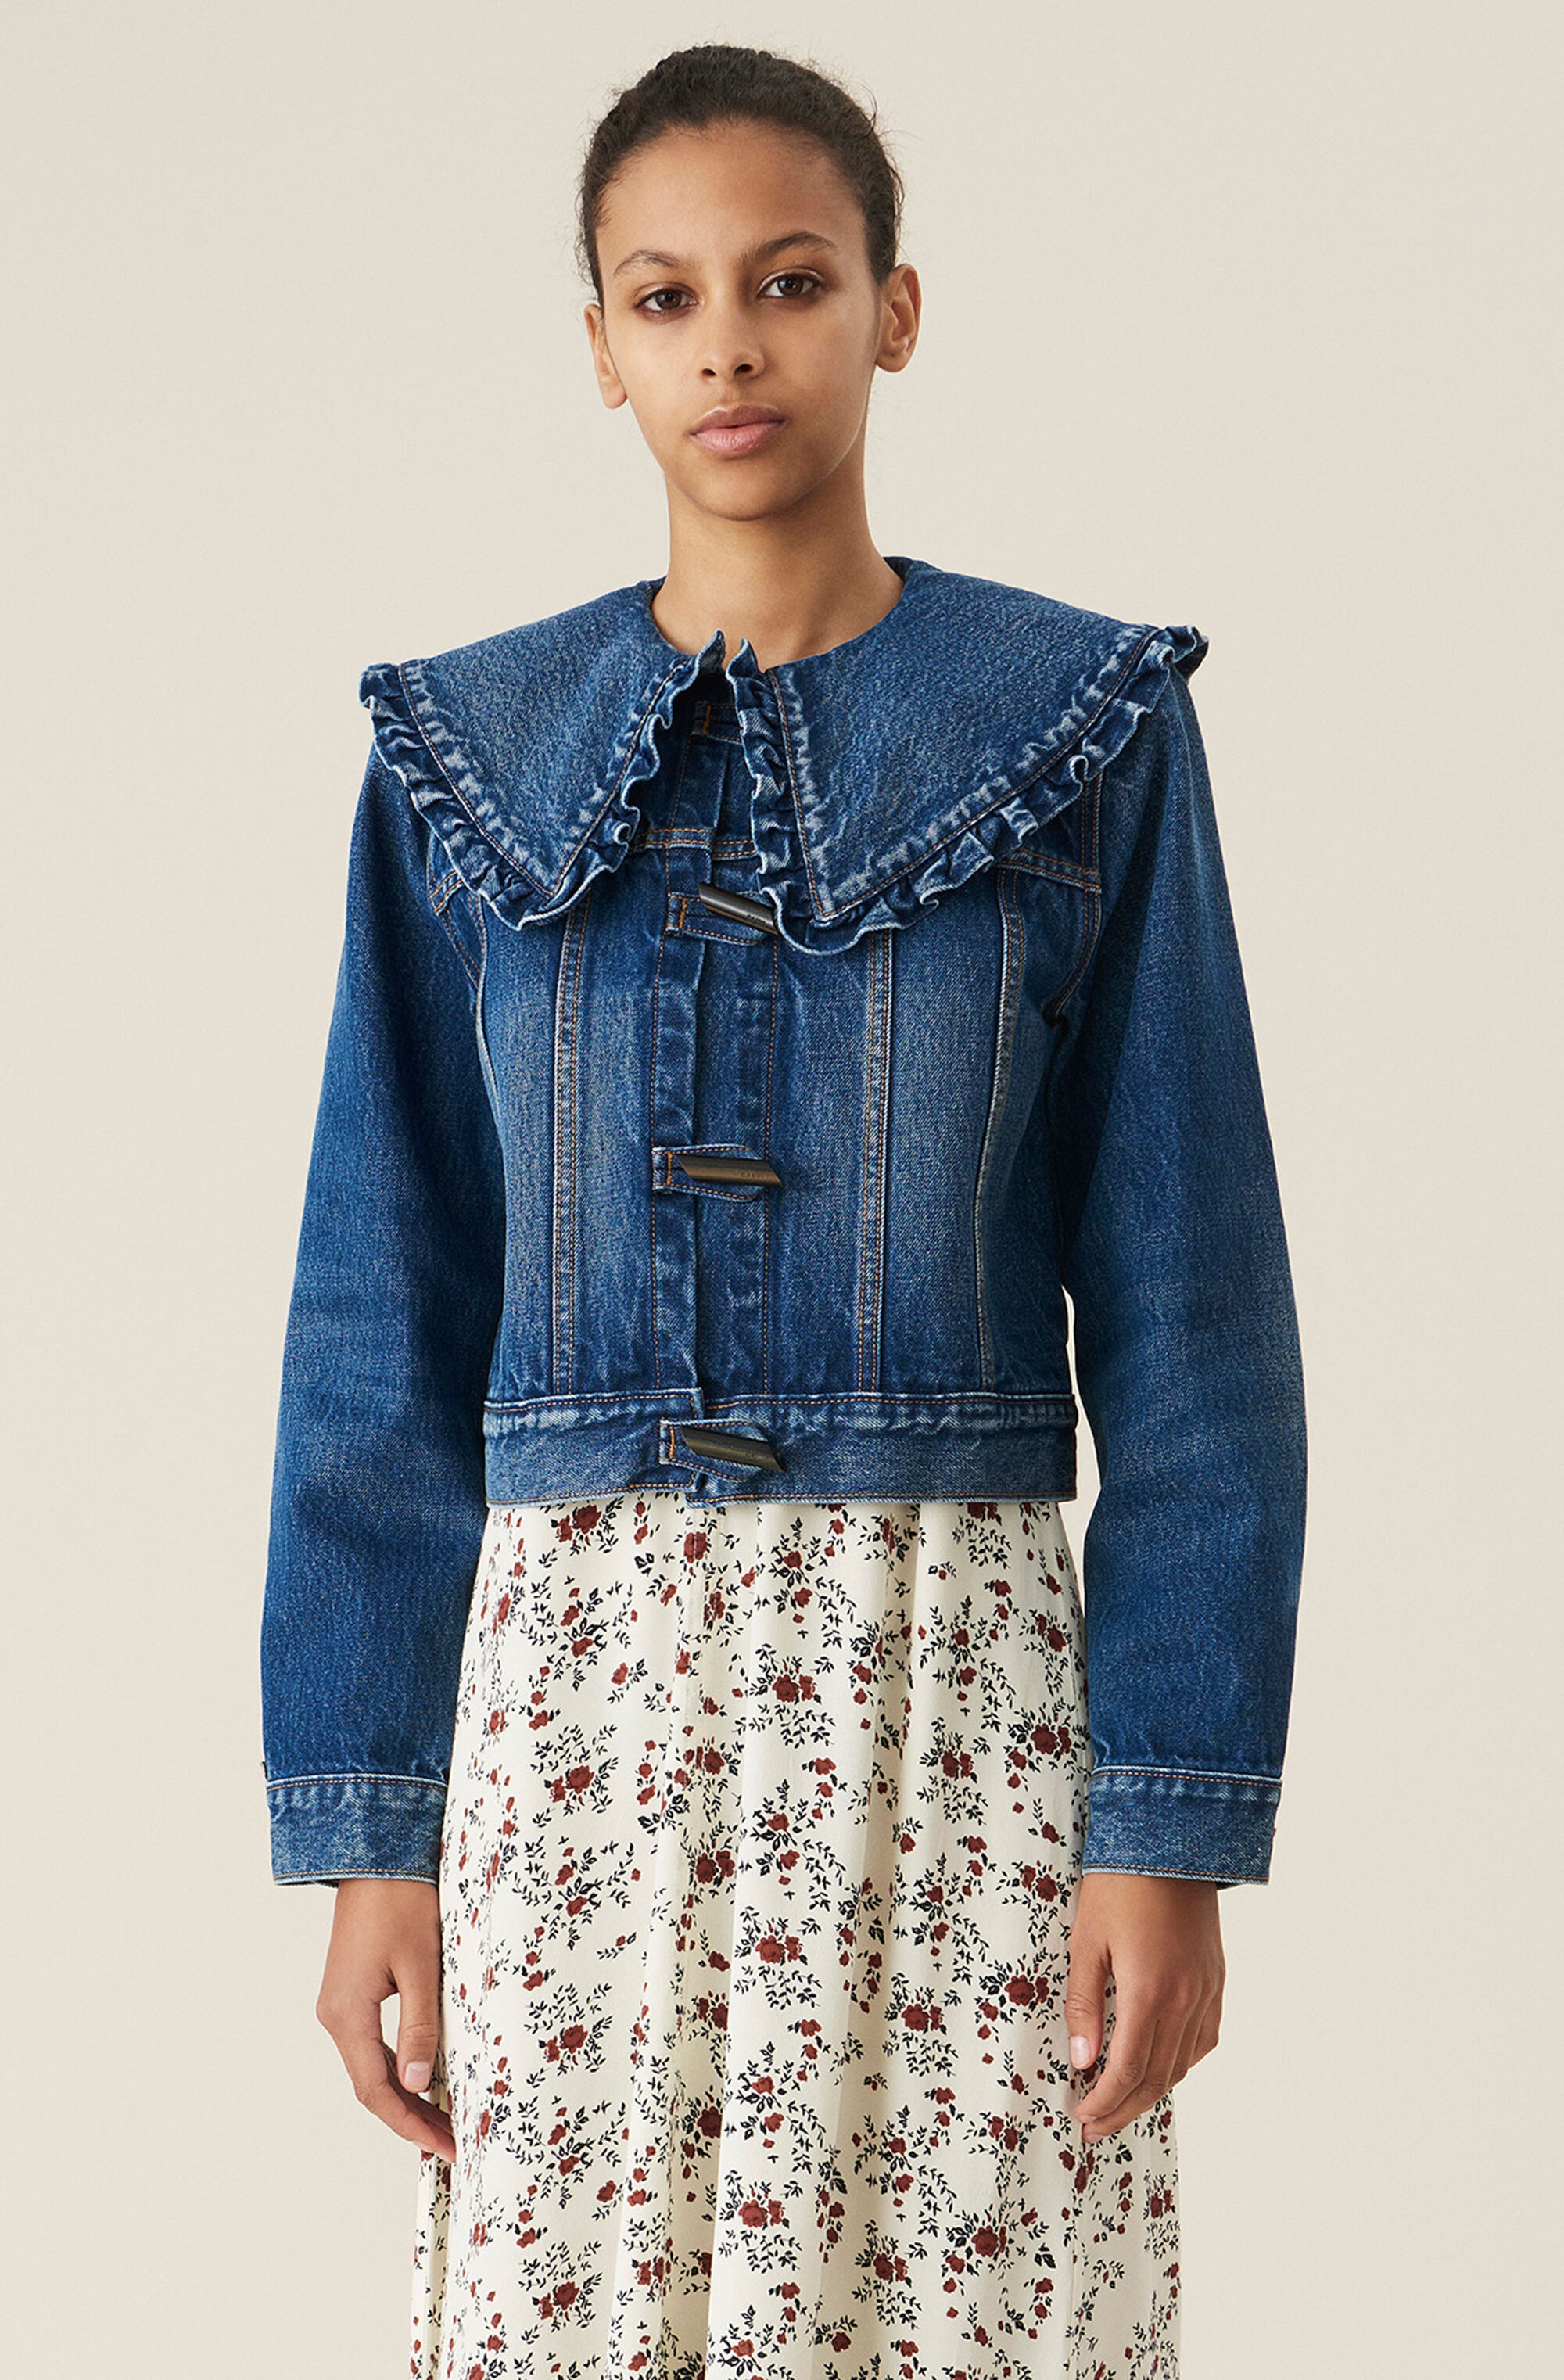 8 Stylish Jean-Jacket-and-Skirt Outfits to Wear This Season | Who What Wear